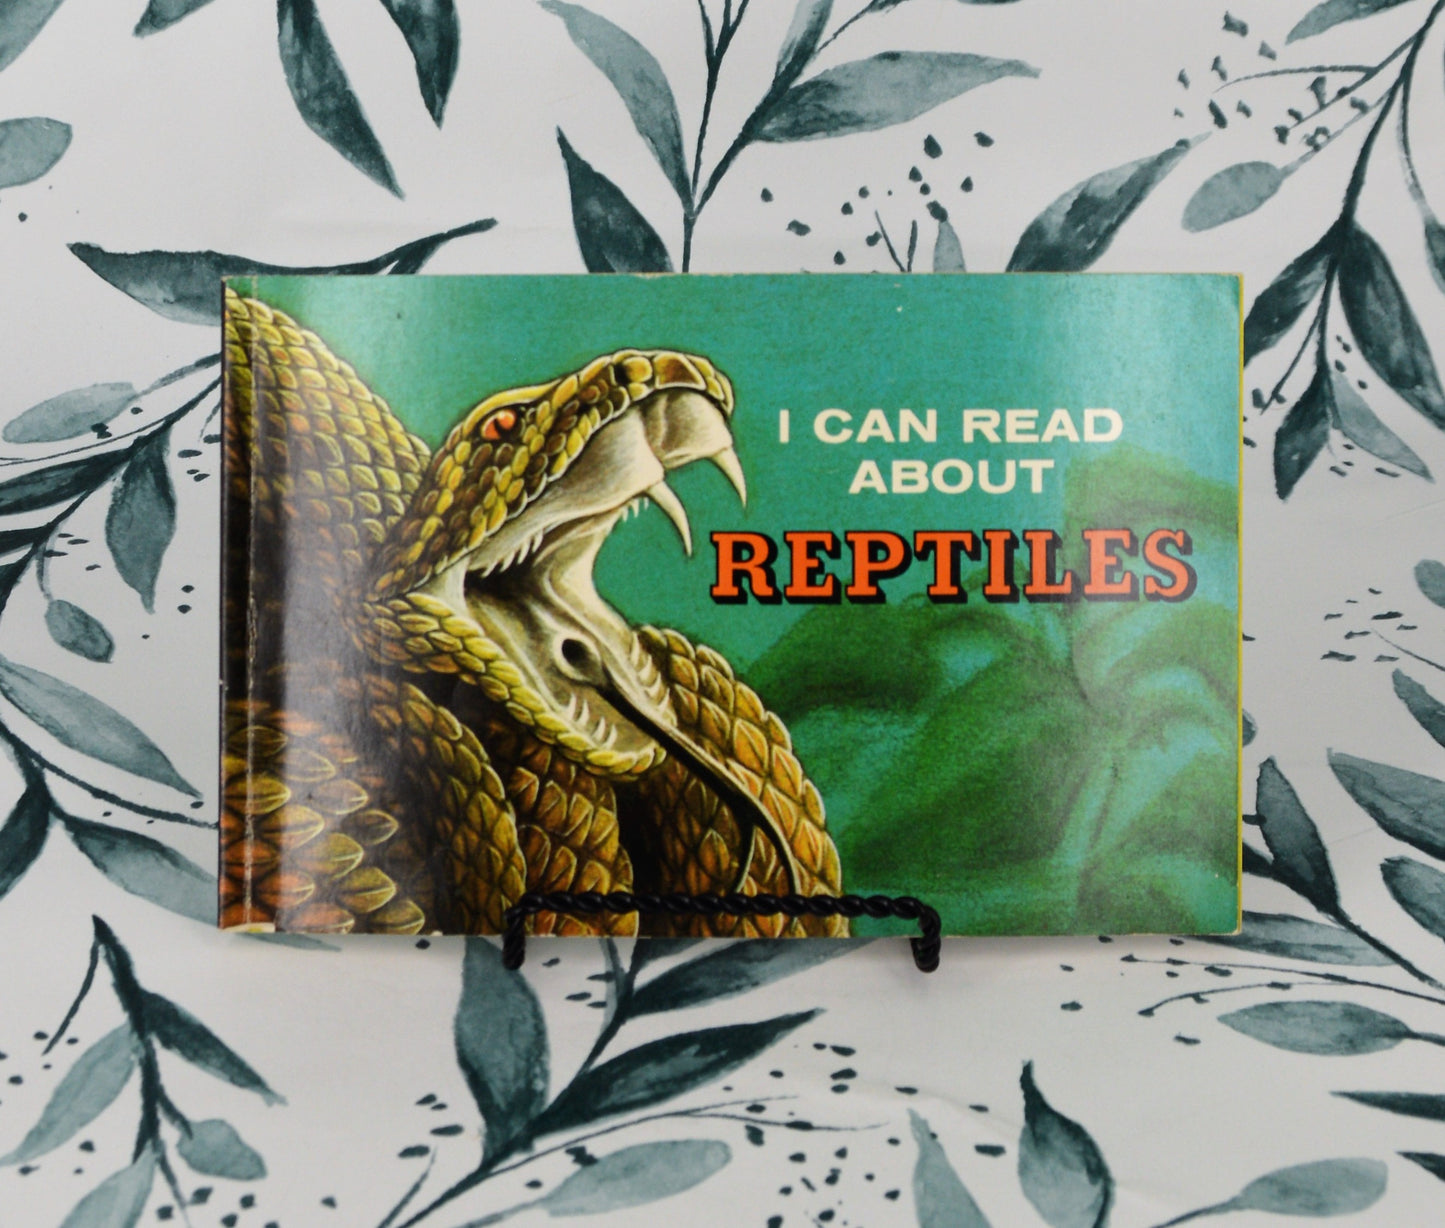 (I Can Read About) Reptiles